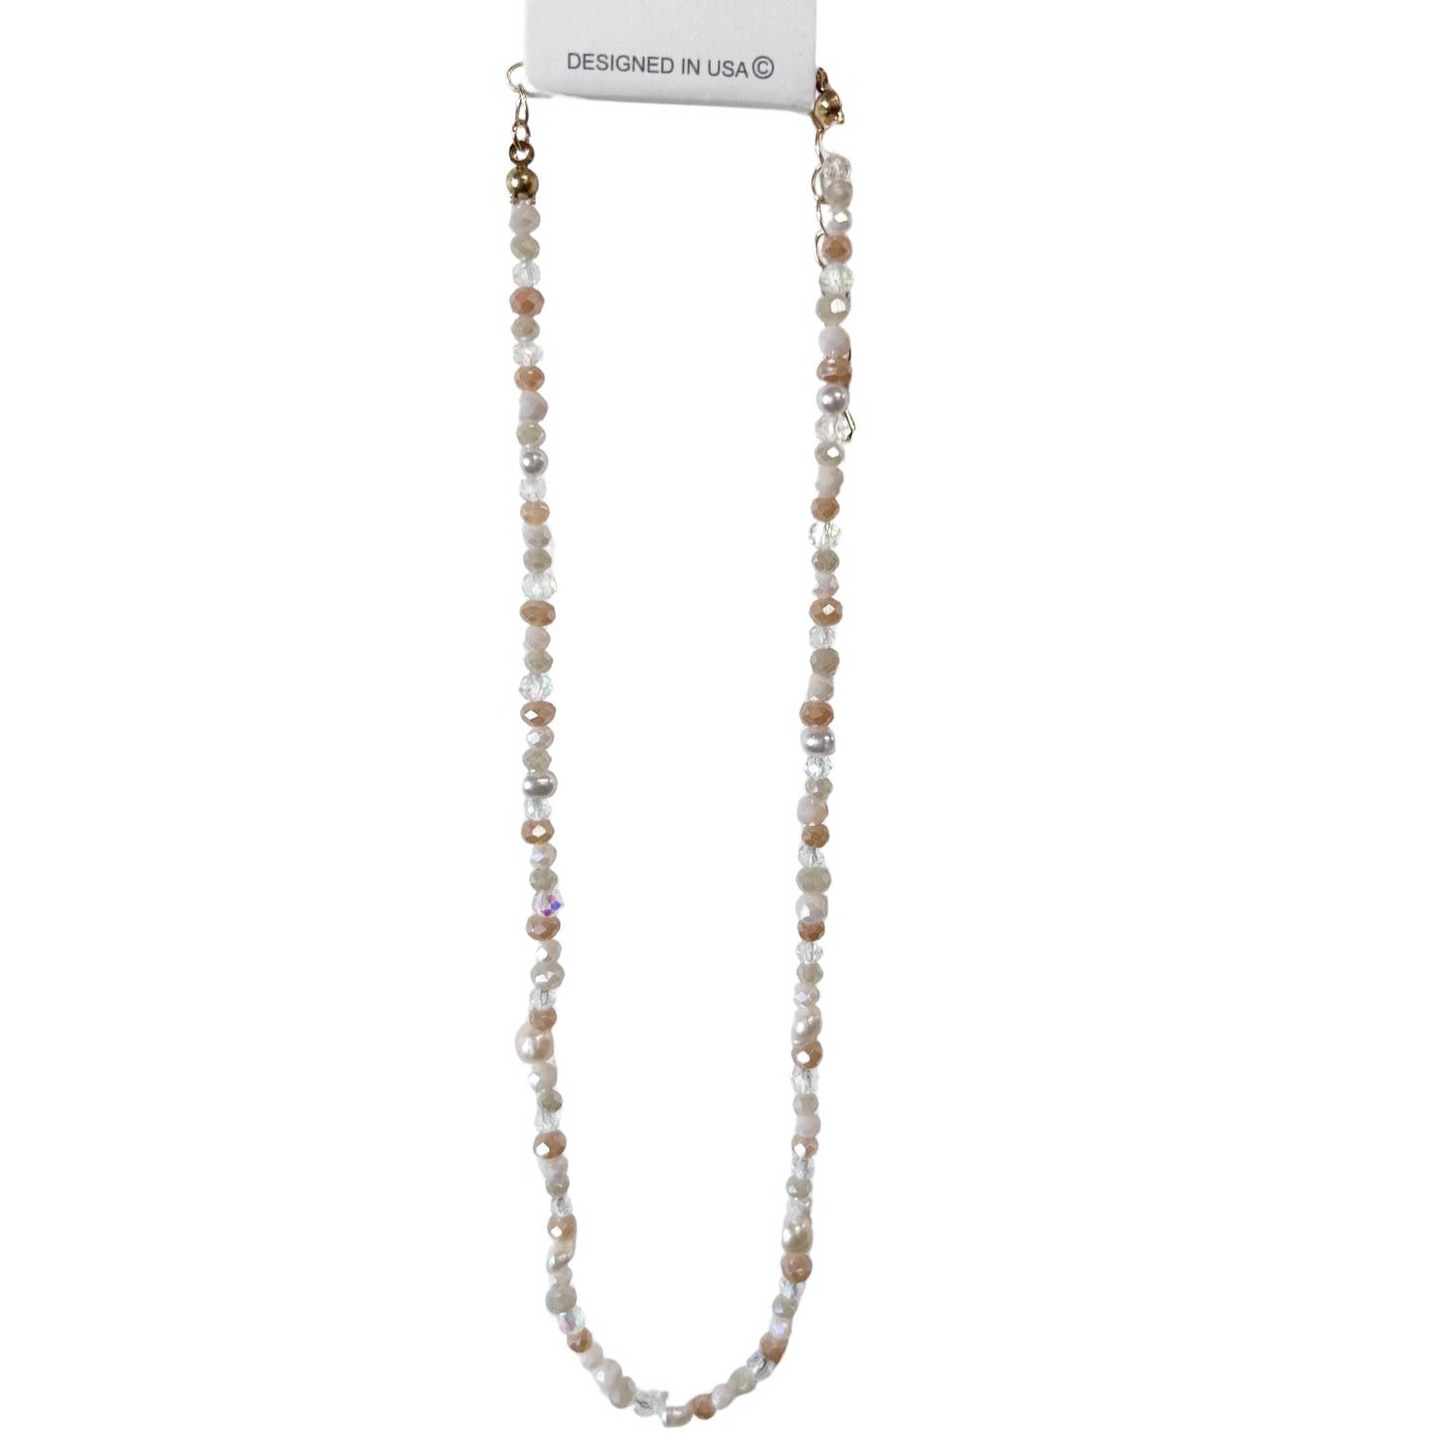 Glass Bead & Pearl Mix Neutral Nude Gold Adjustable Necklace